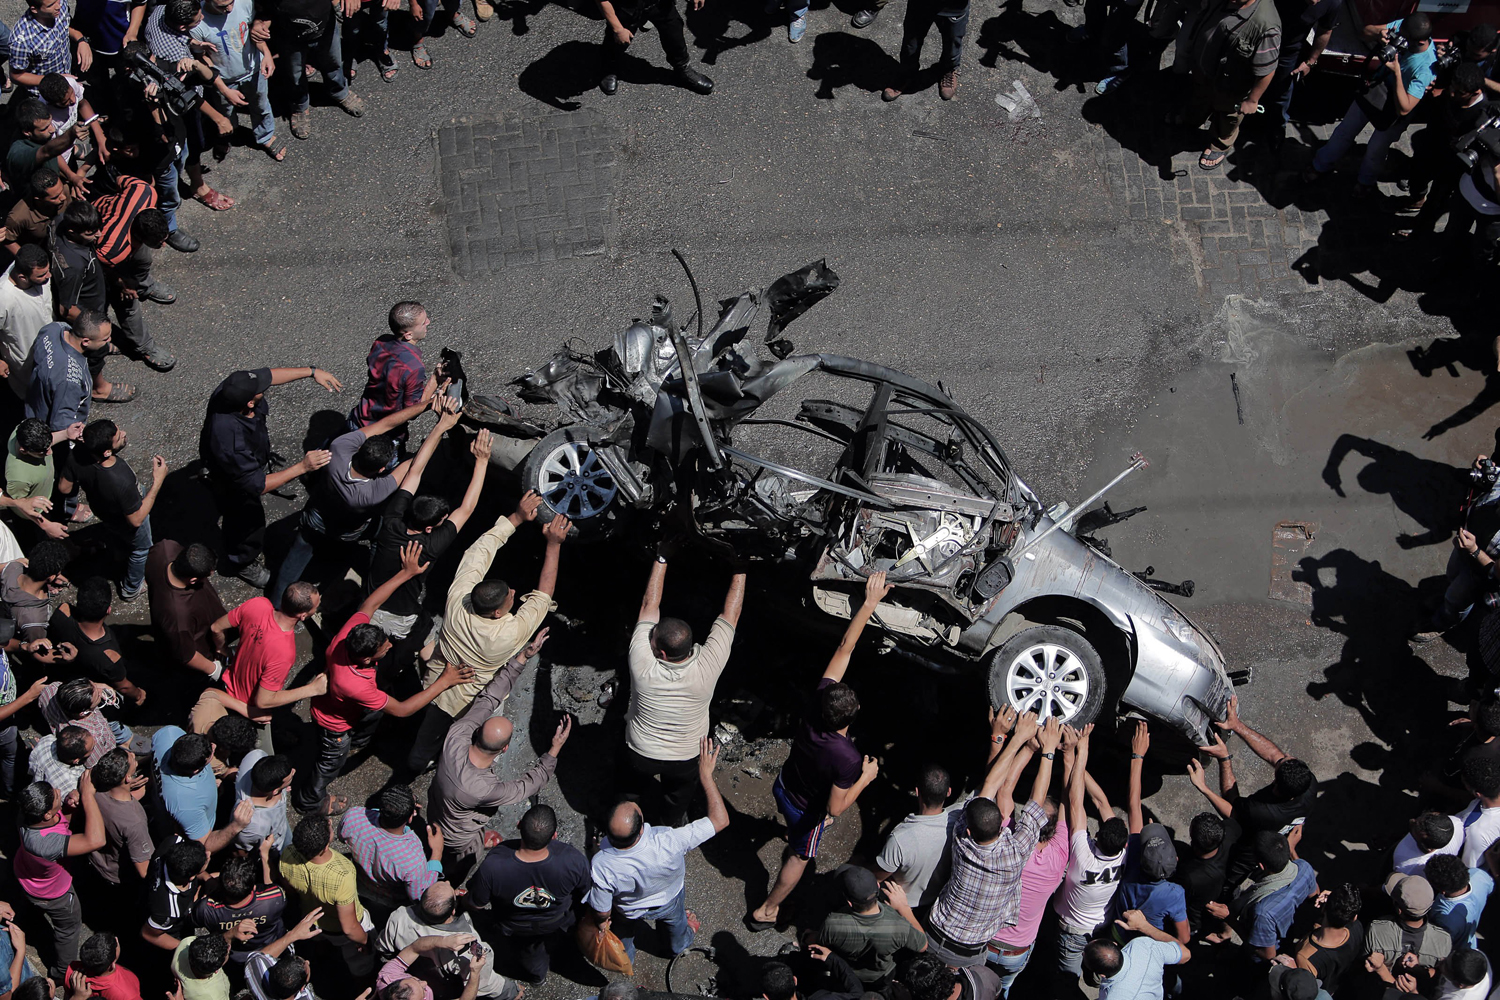 Jul. 8, 2014. Palestinians inspect a destroyed car of militants following an Israeli airstrike in central Gaza City. Israel launched a major military offensive against the Gaza Strip Tuesday in response to increasing rocket attacks by Palestinian militants.